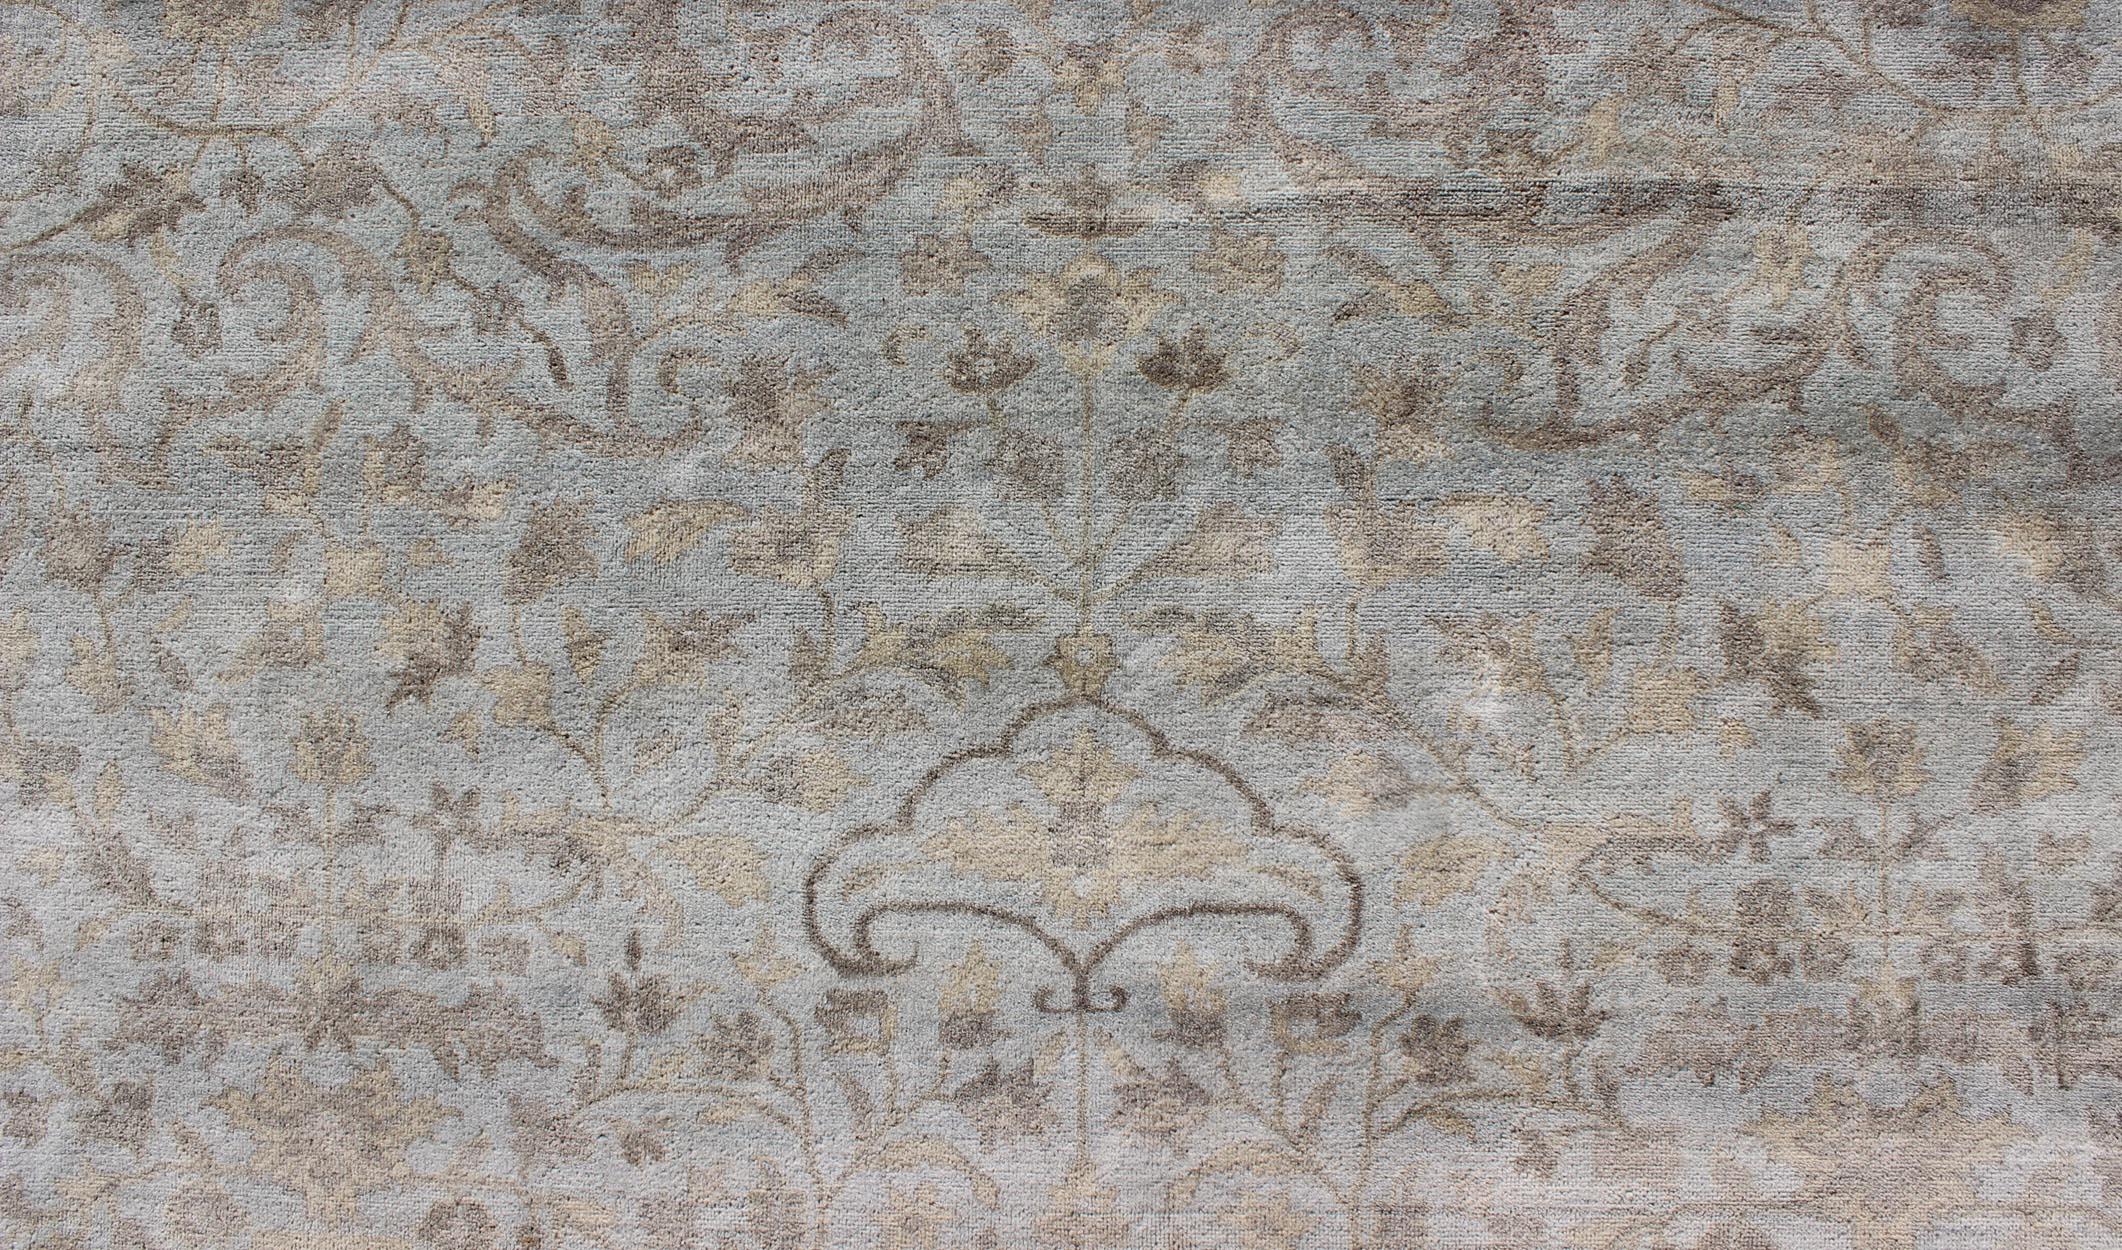 Wool Large Floral Tabriz with Floral Design in Lt. Blue, Brown, Lt. Yellow, Taupe For Sale